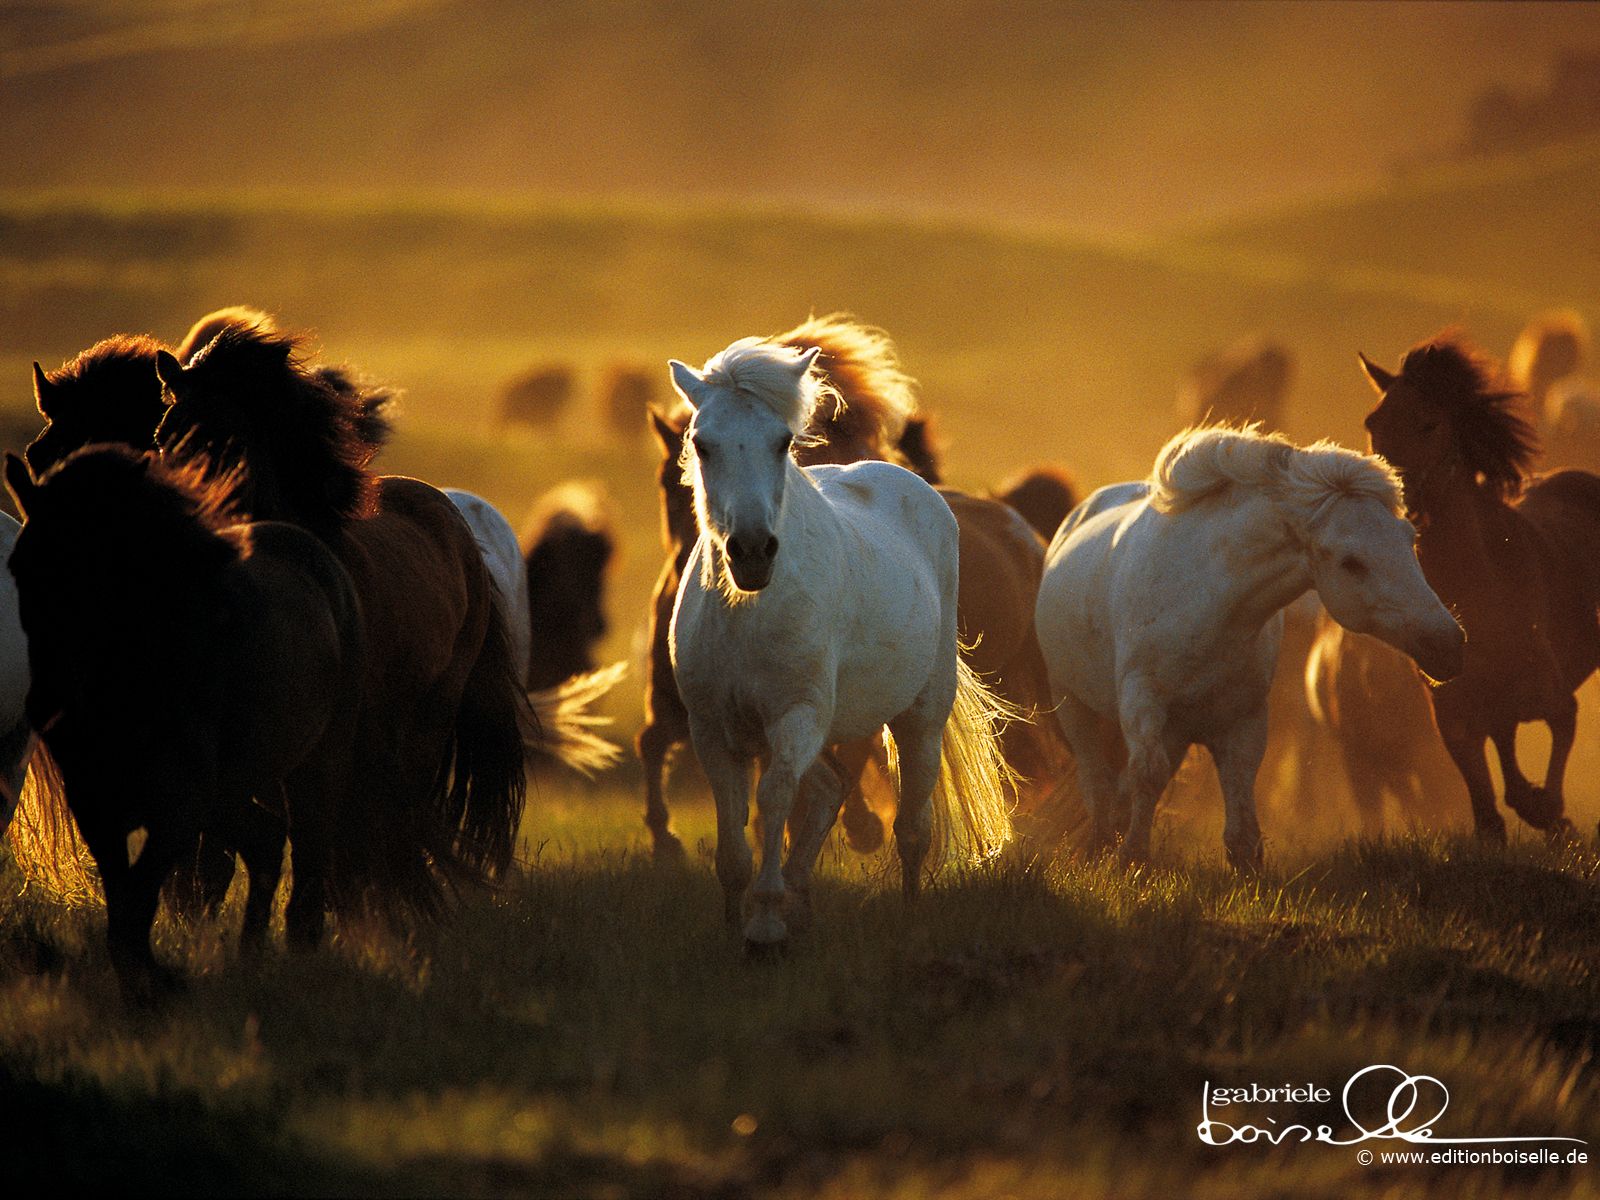 The herd. Horse wallpaper, Horses, Horse picture